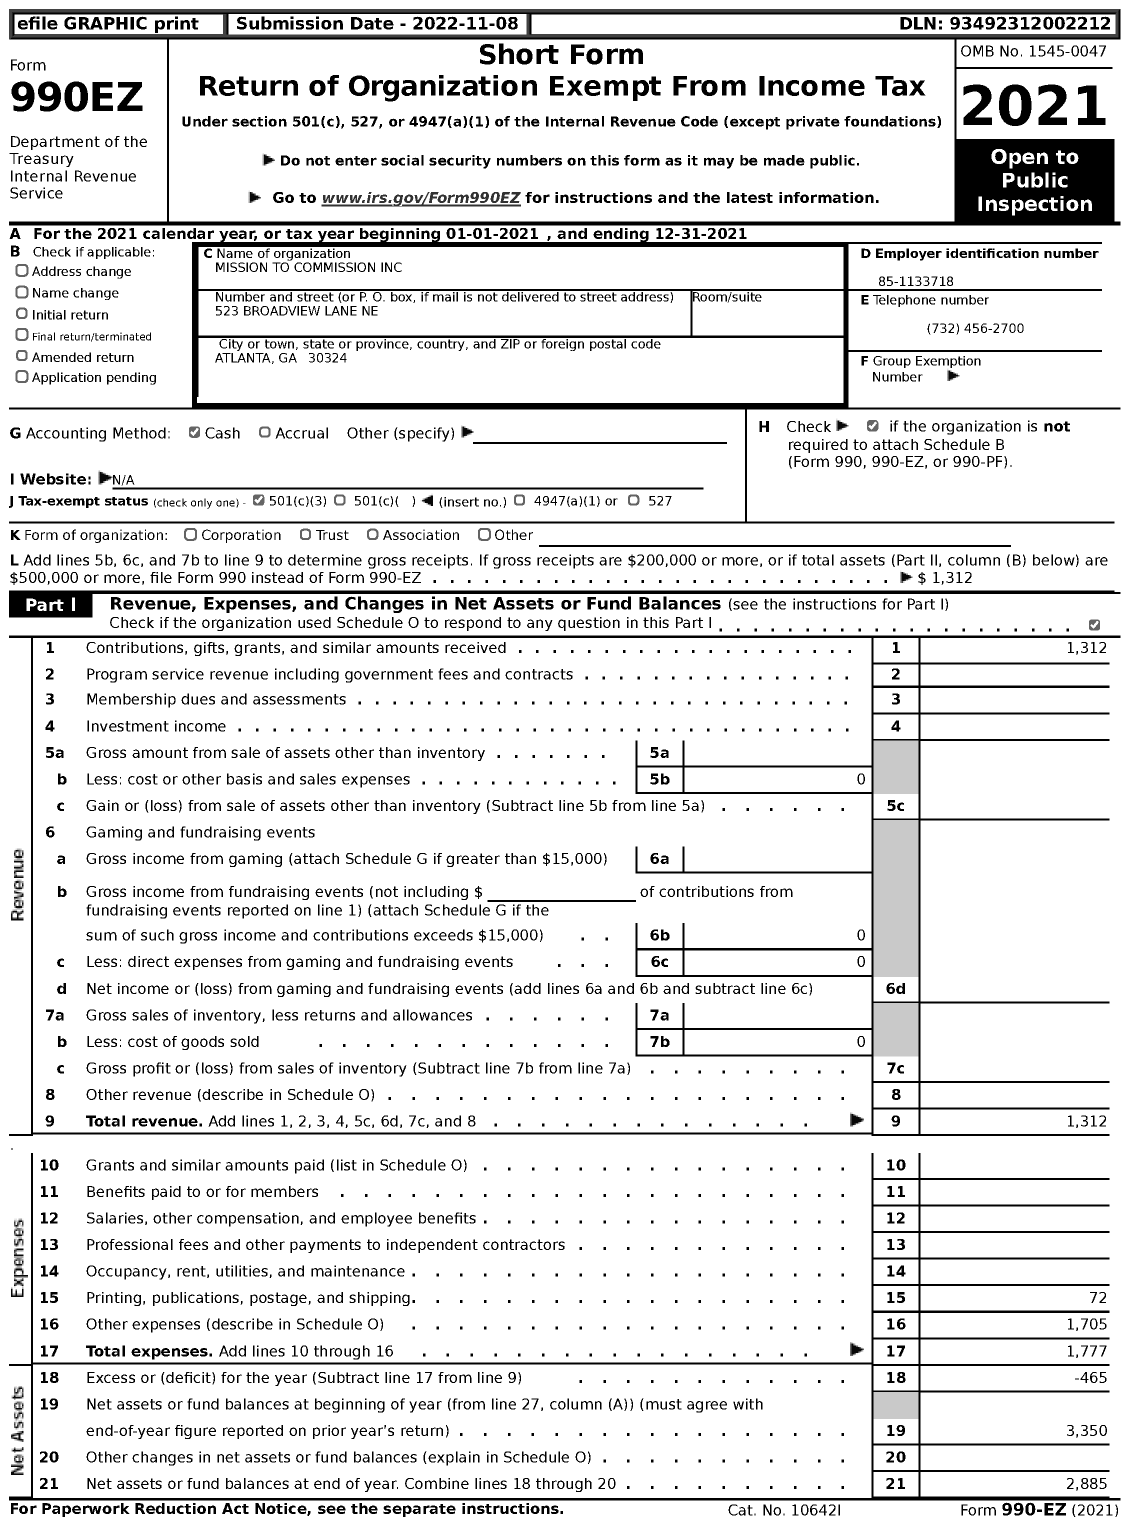 Image of first page of 2021 Form 990EZ for Mission to Commission Inc. (MTC)